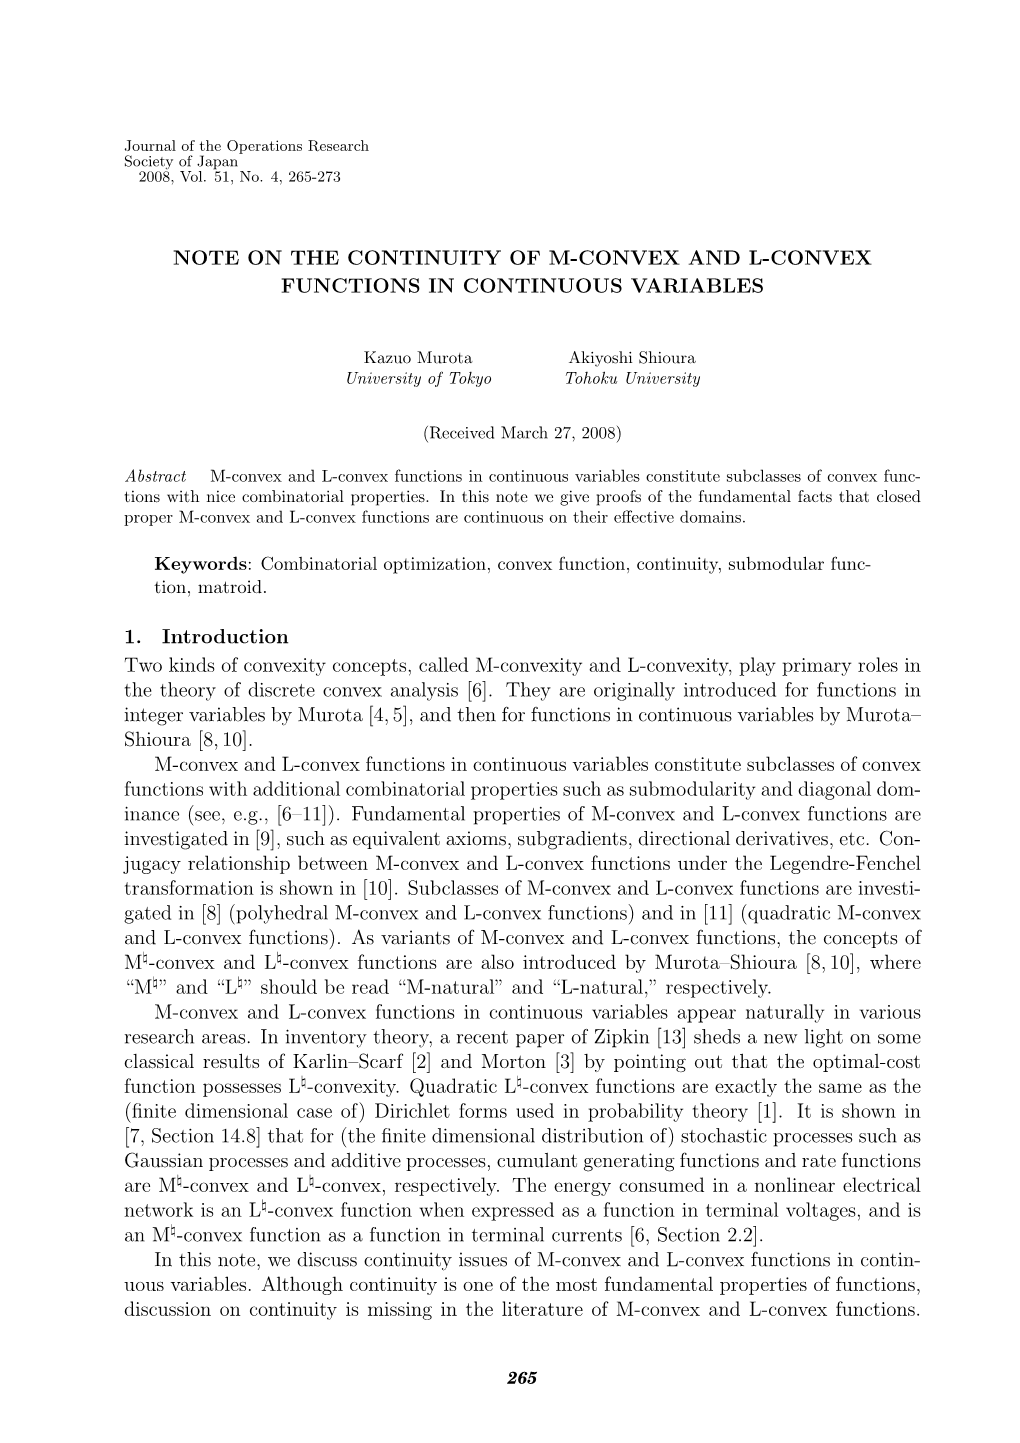 NOTE on the CONTINUITY of M-CONVEX and L-CONVEX FUNCTIONS in CONTINUOUS VARIABLES 1. Introduction Two Kinds of Convexity Concept